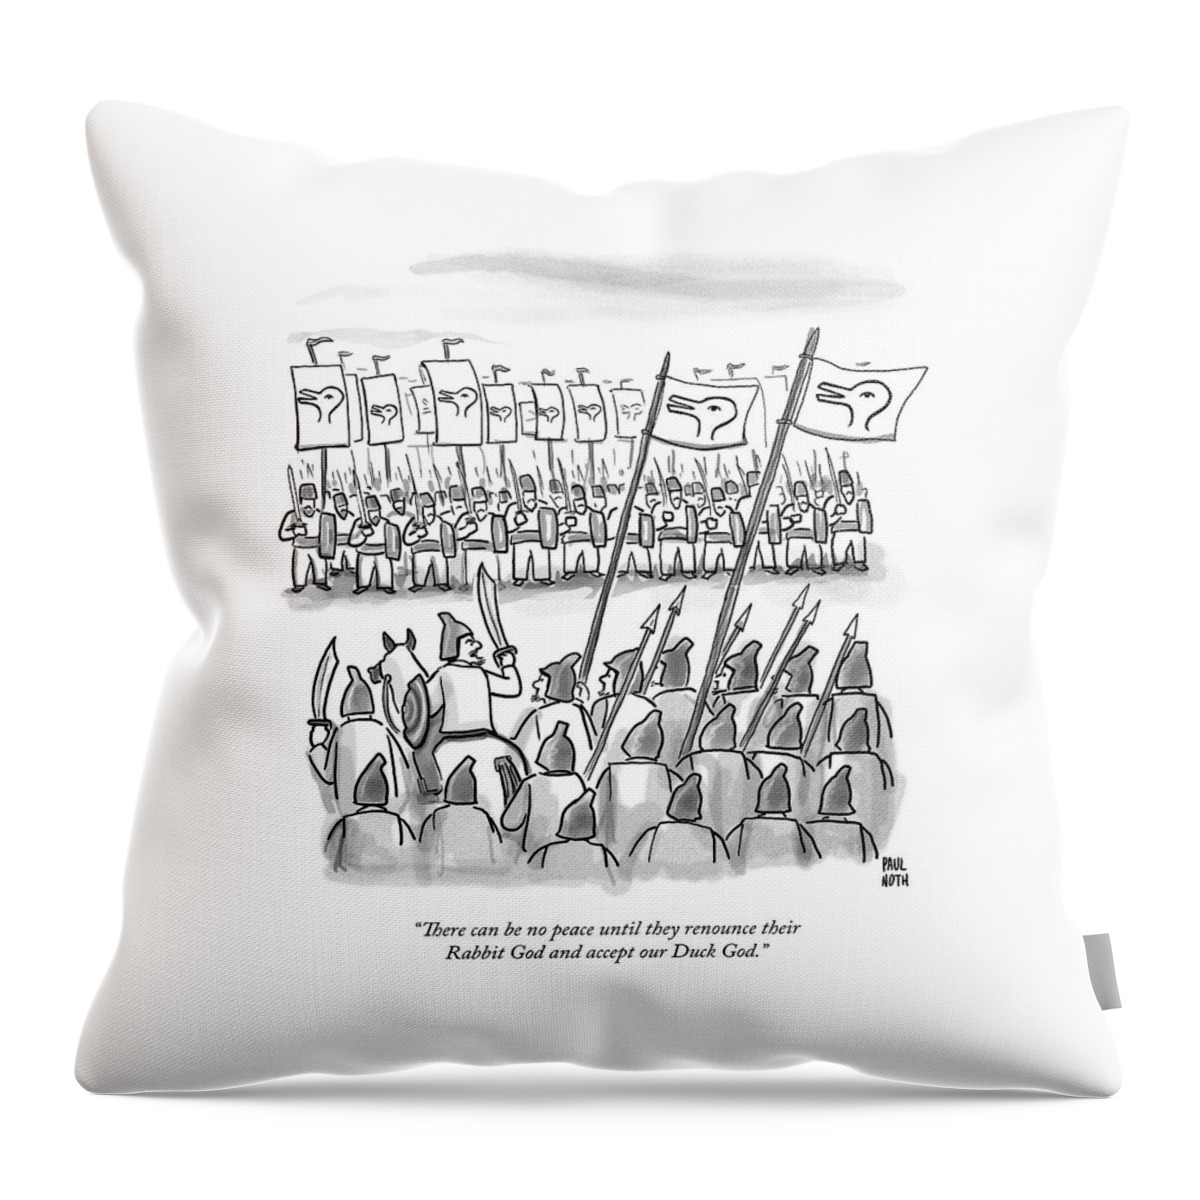 An Army Lines Up For Battle Throw Pillow